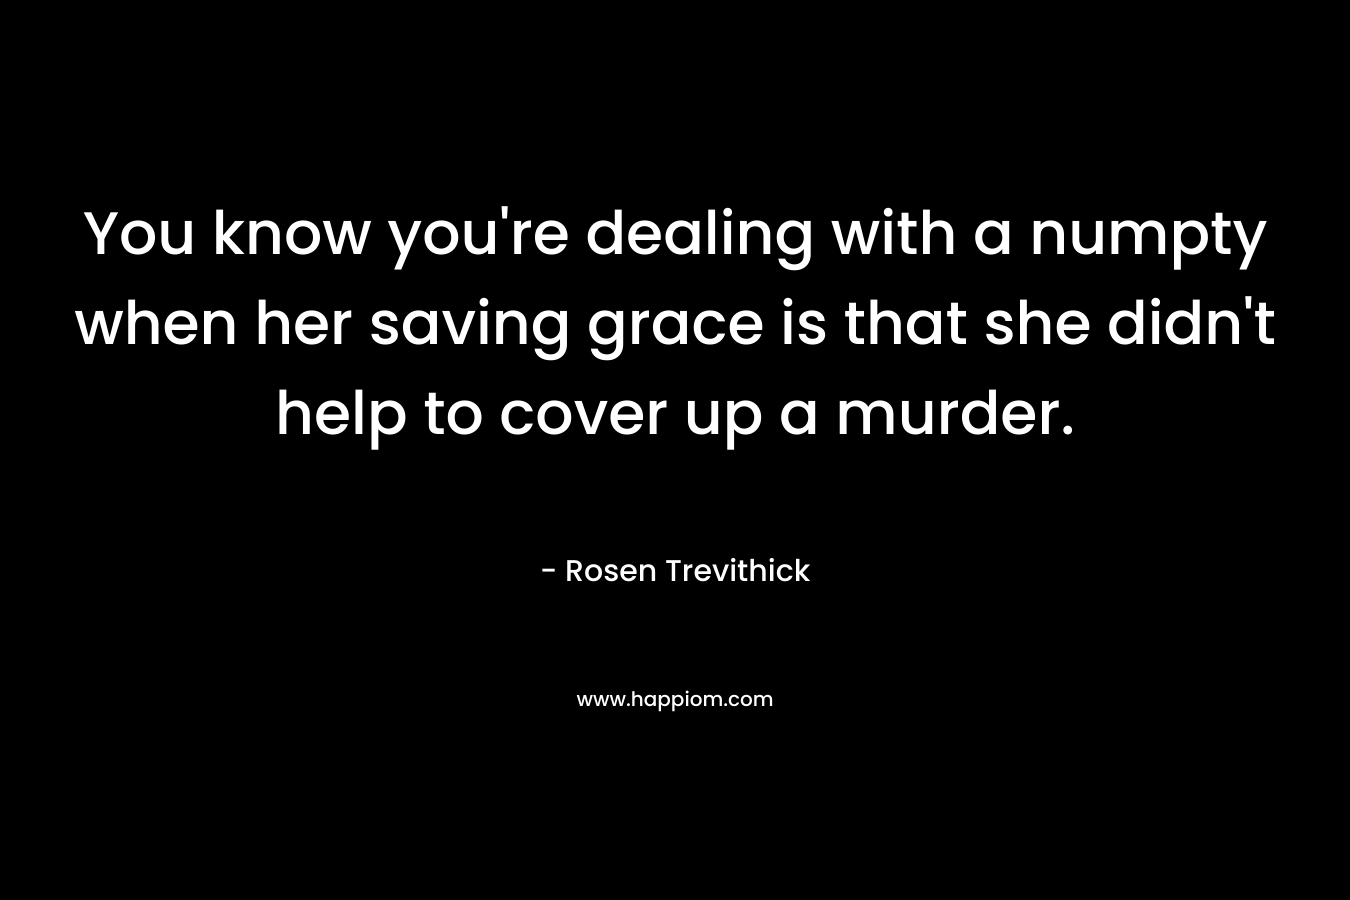 You know you're dealing with a numpty when her saving grace is that she didn't help to cover up a murder.